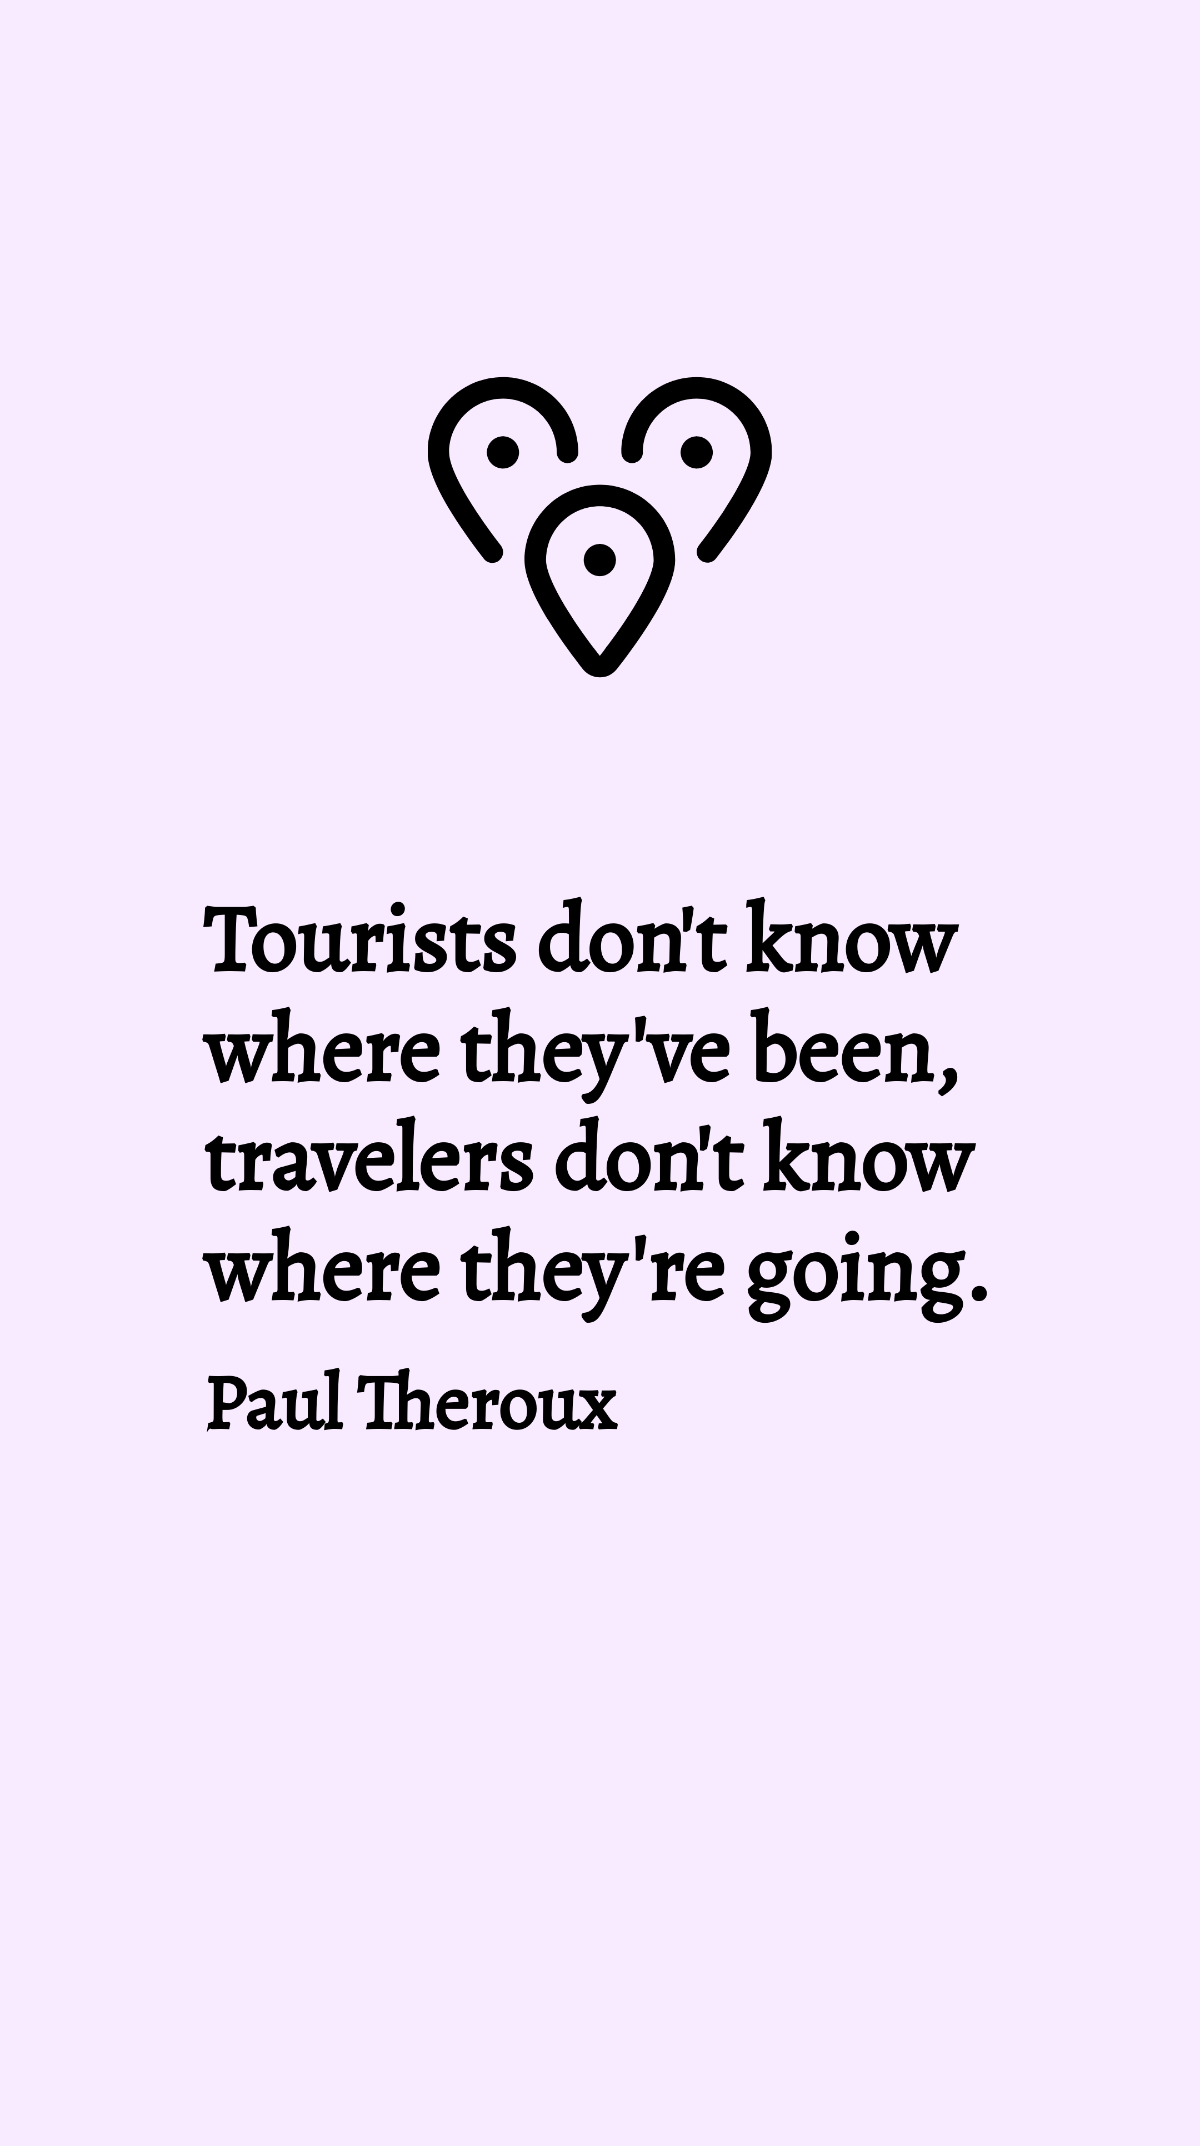 Free Paul Theroux - Tourists don't know where they've been, travelers don't know where they're going. Template